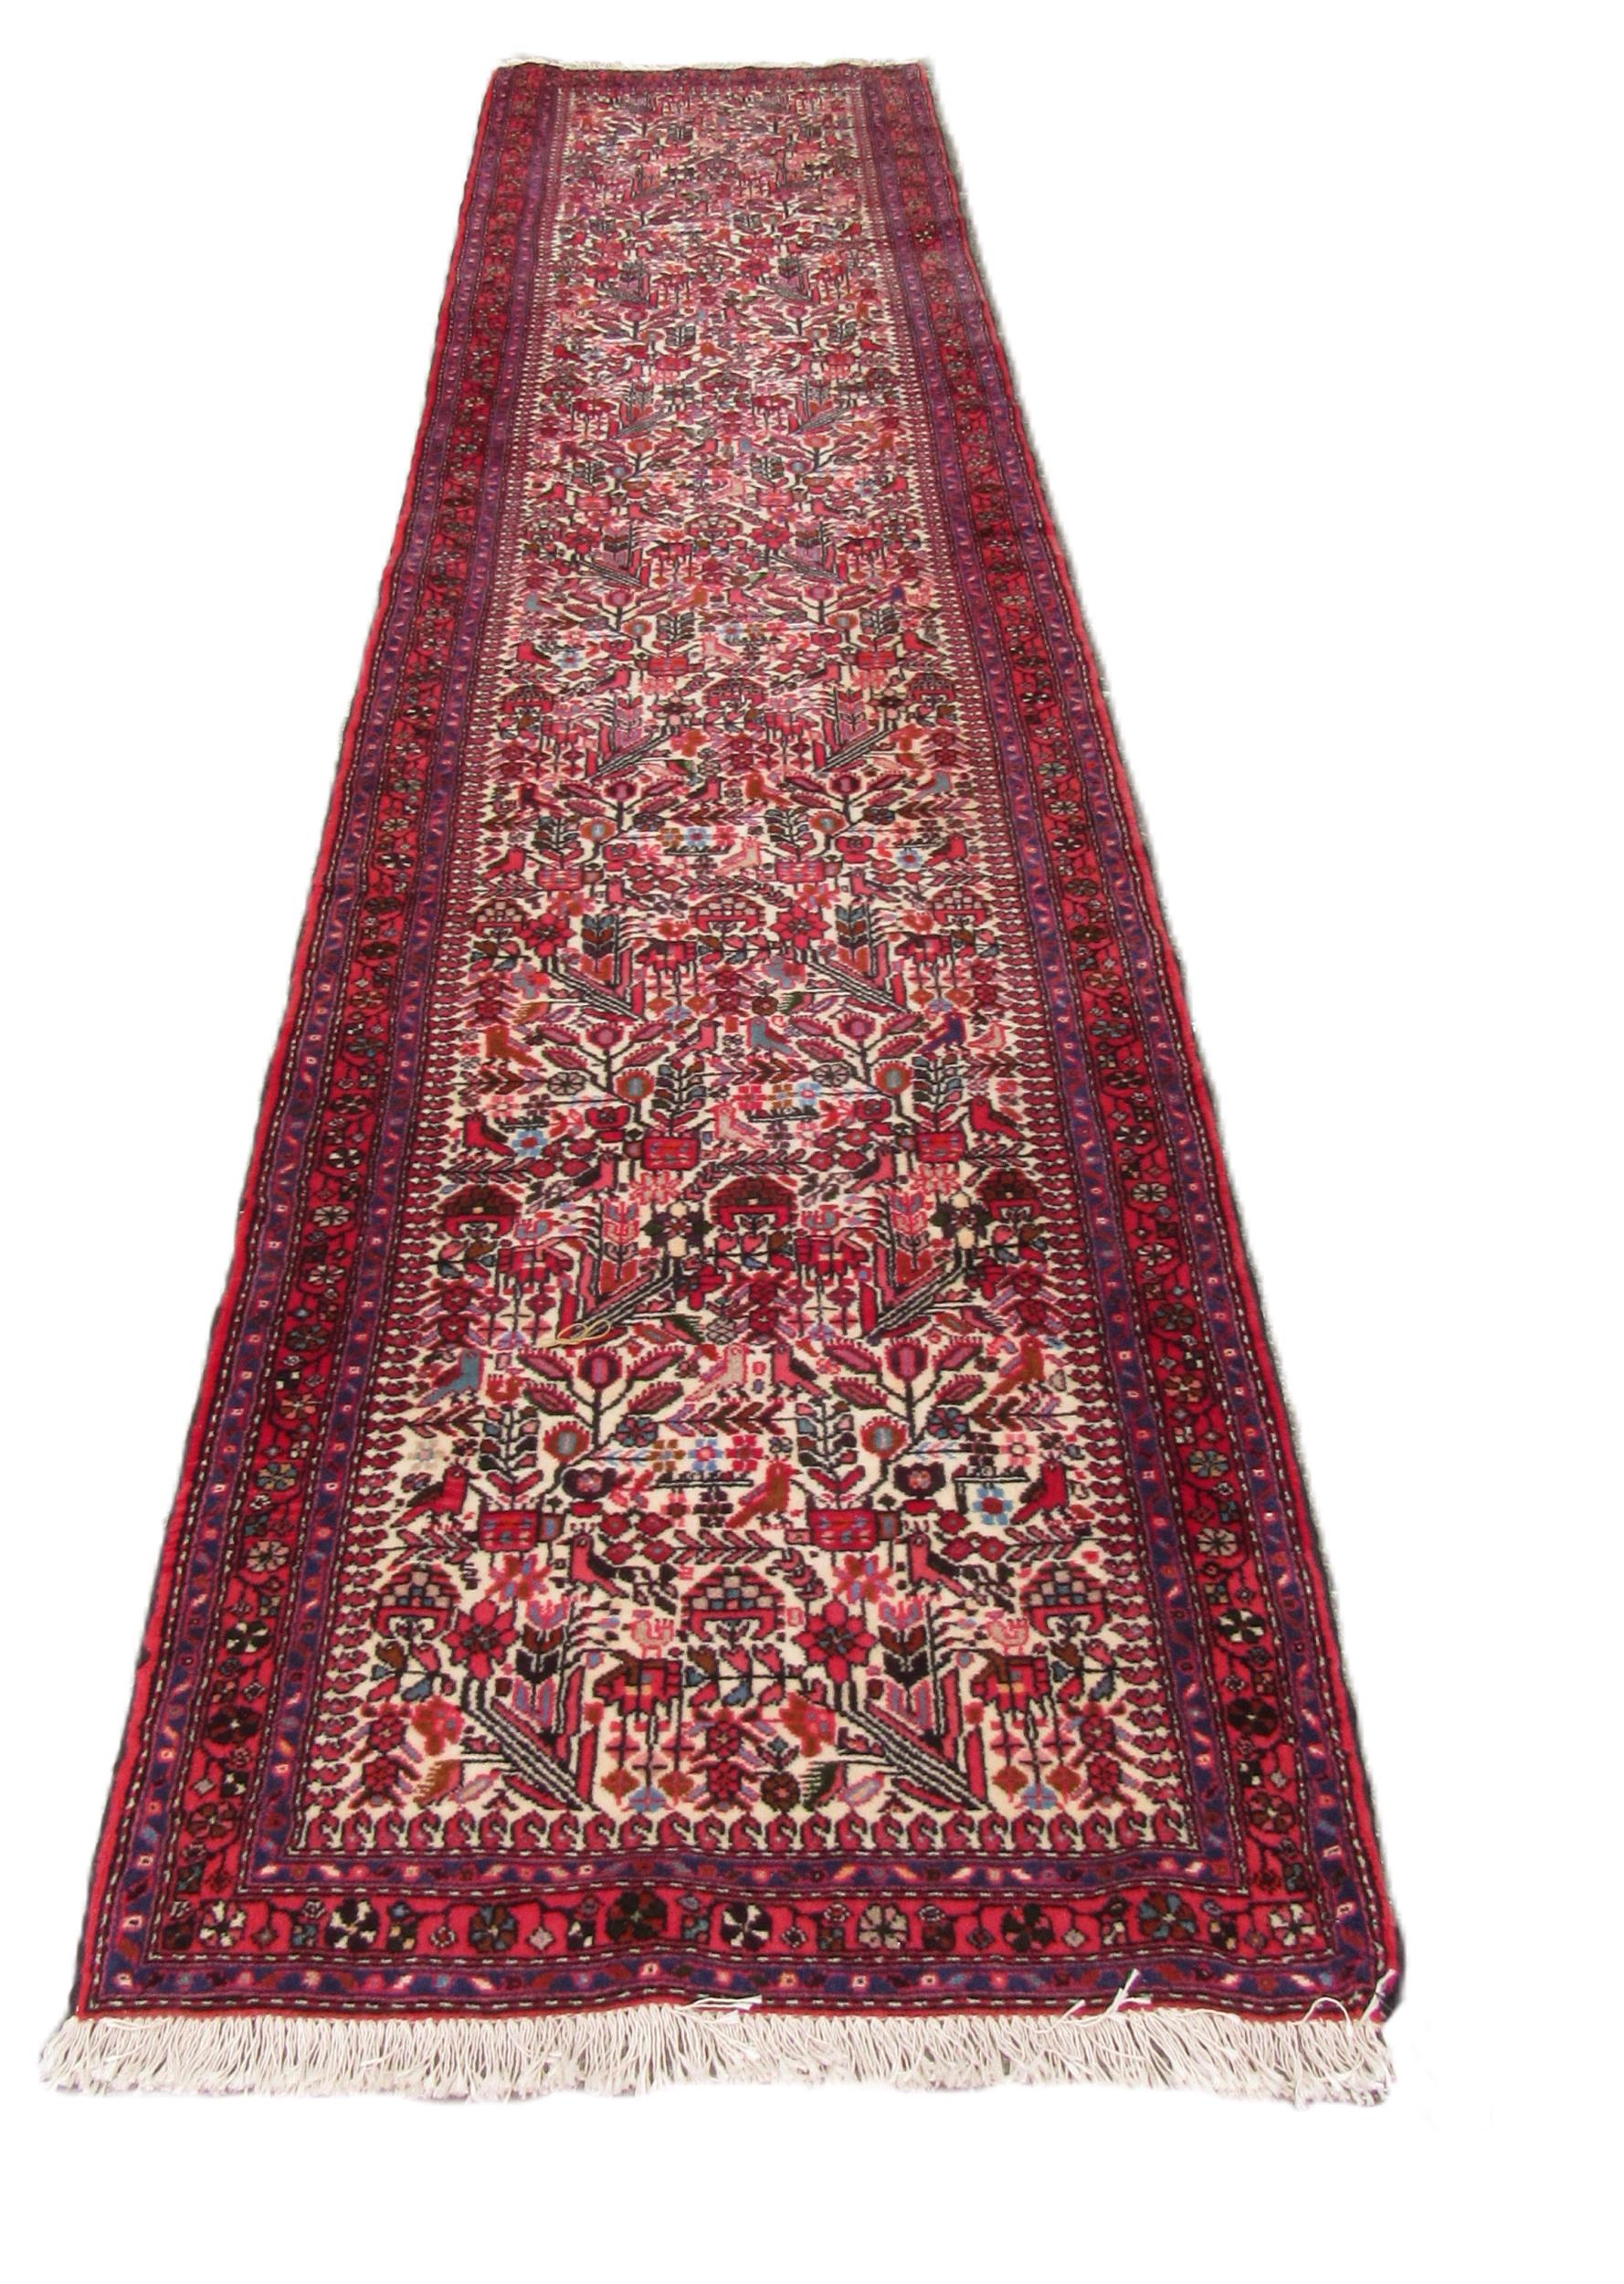 An attractive Middle Eastern heavy woolen Carpet Runner, (Persian - Rudbah) the central cream ground